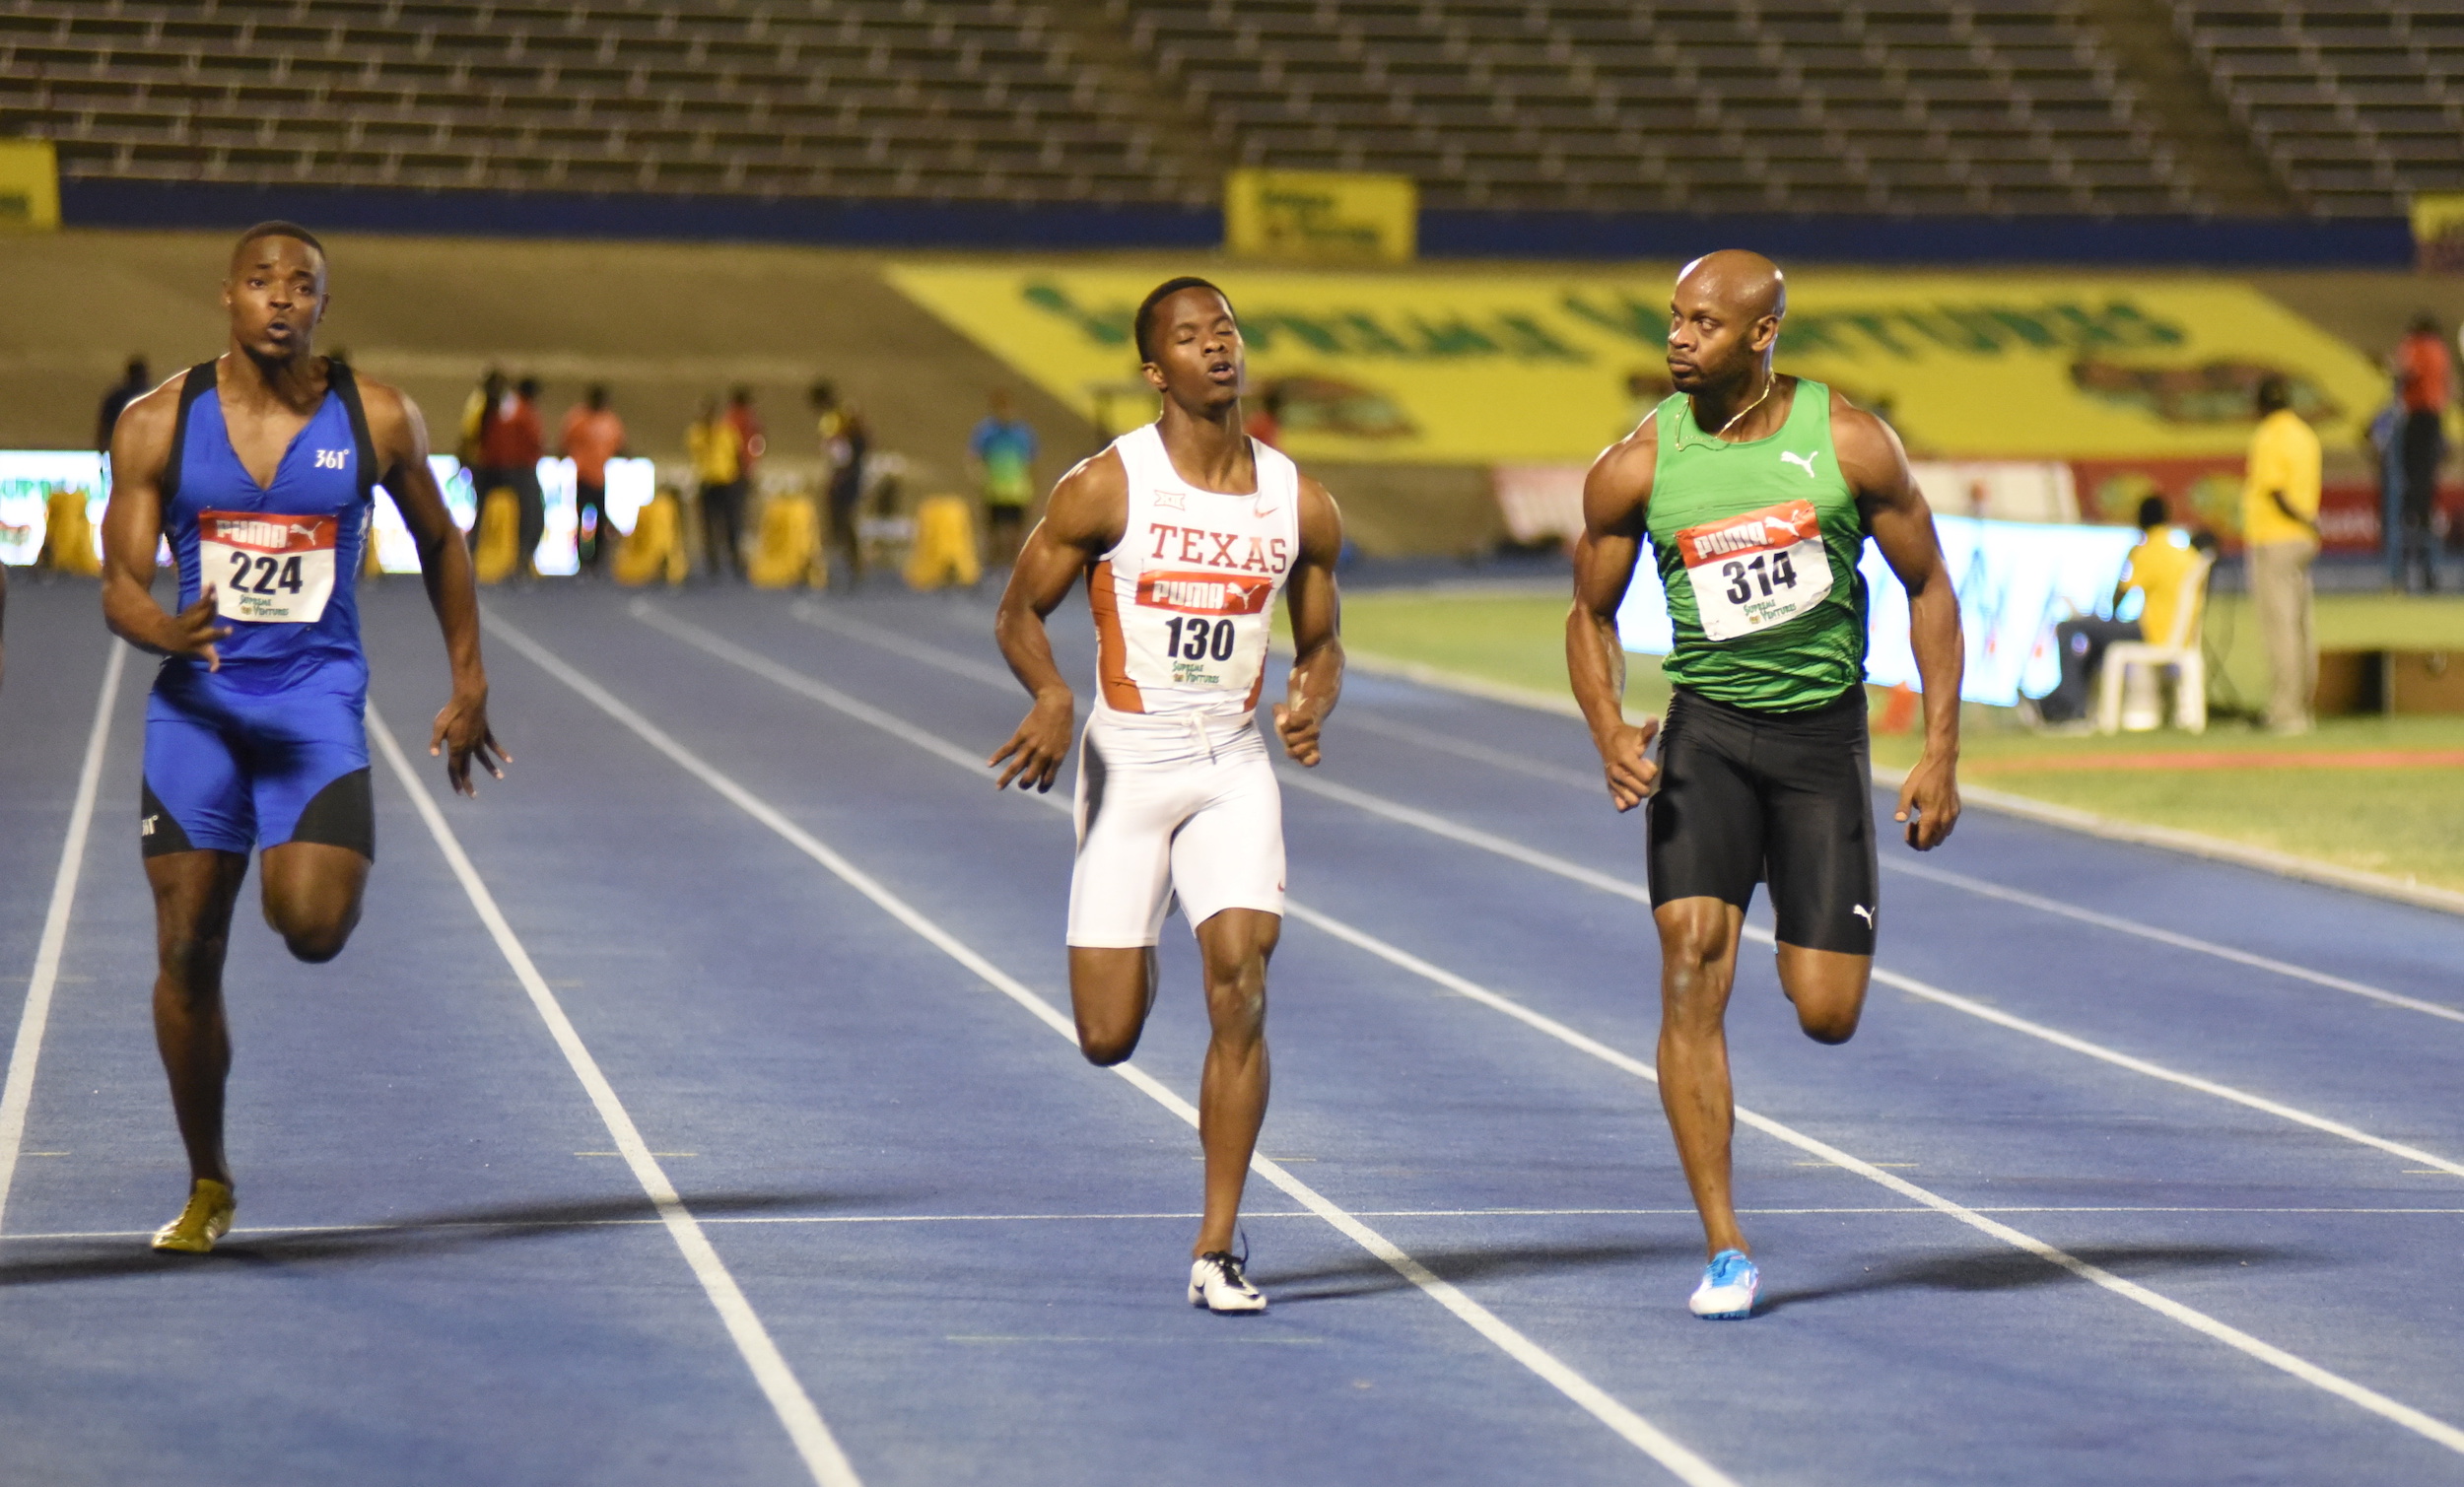 “Senoj-Jay’s execution of his race was outstanding” says coach